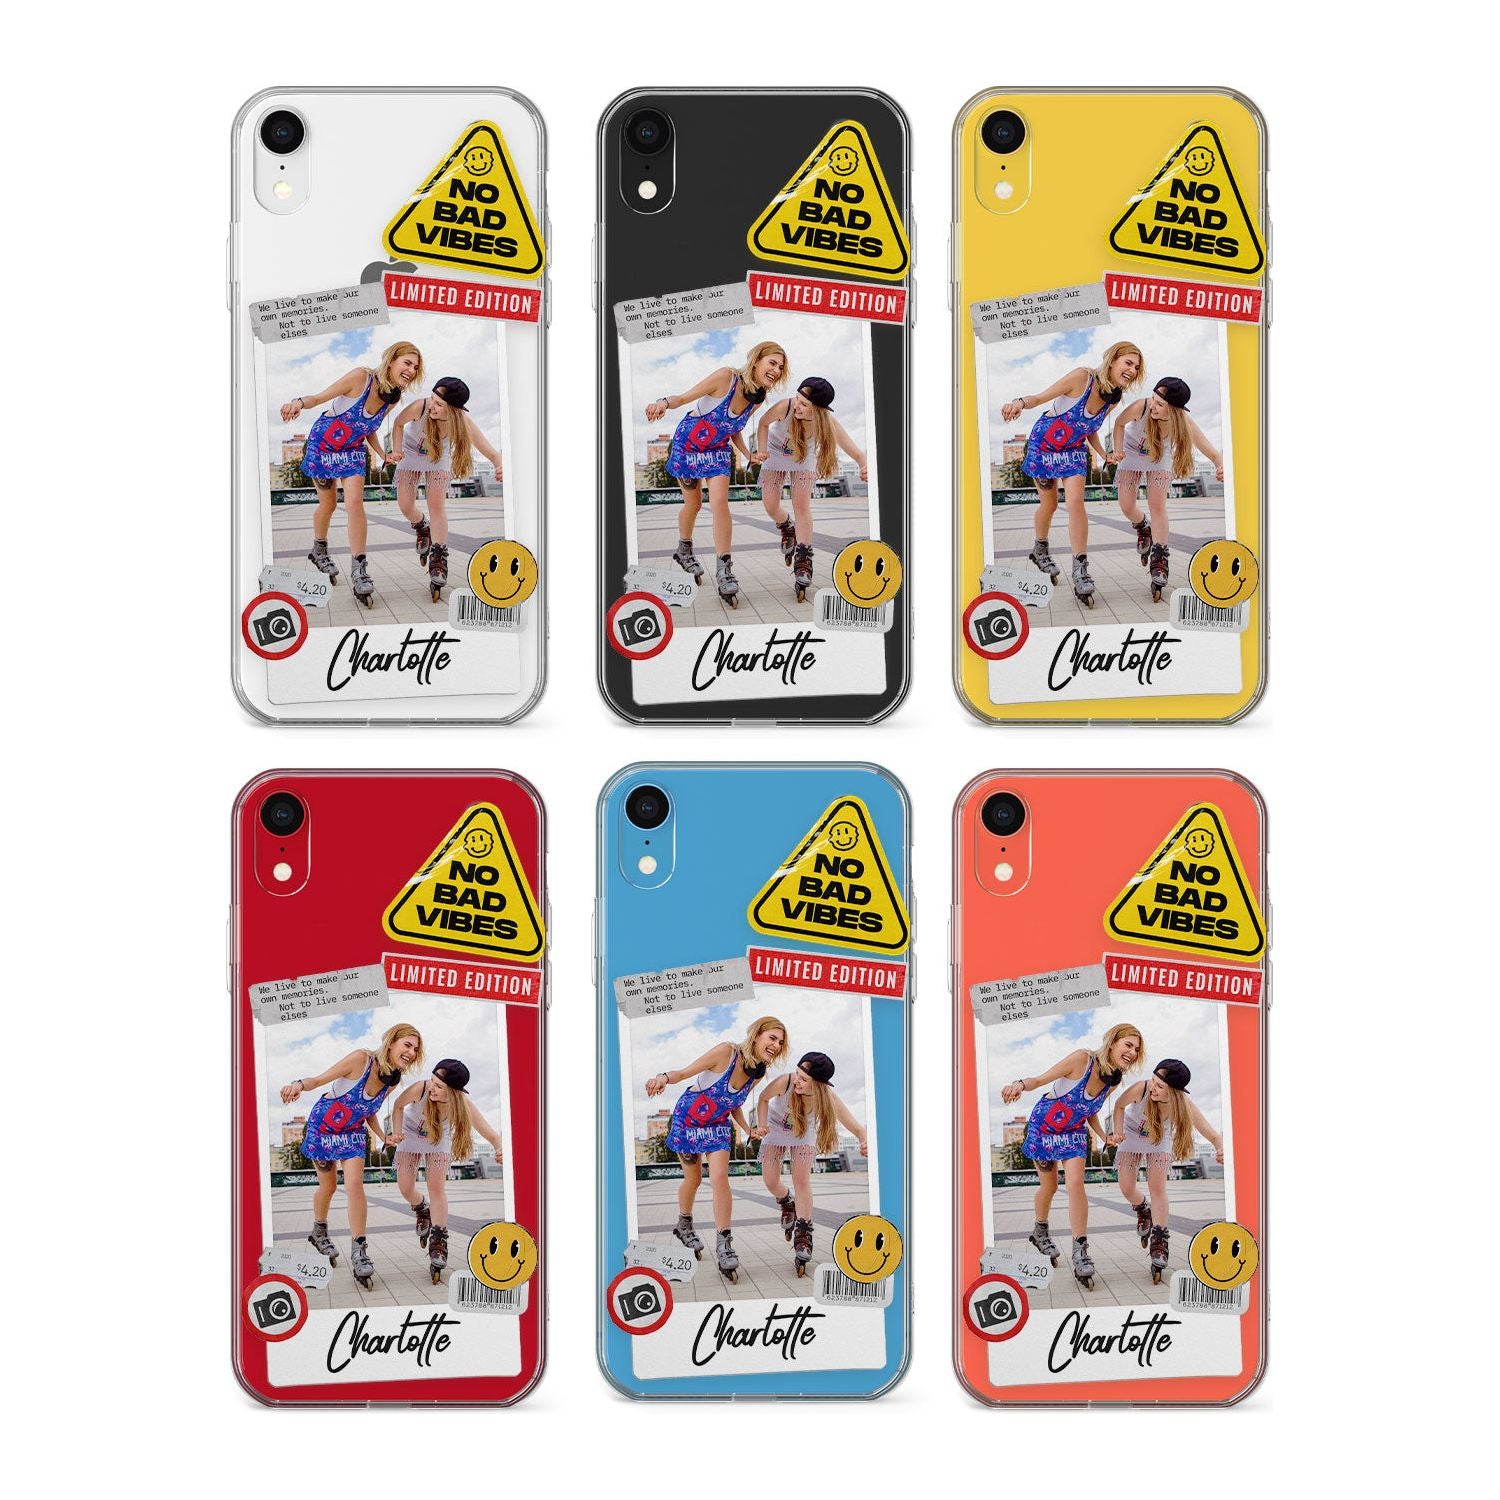 Personalised Snake Instant Photo Phone Case for iPhone X XS Max XR